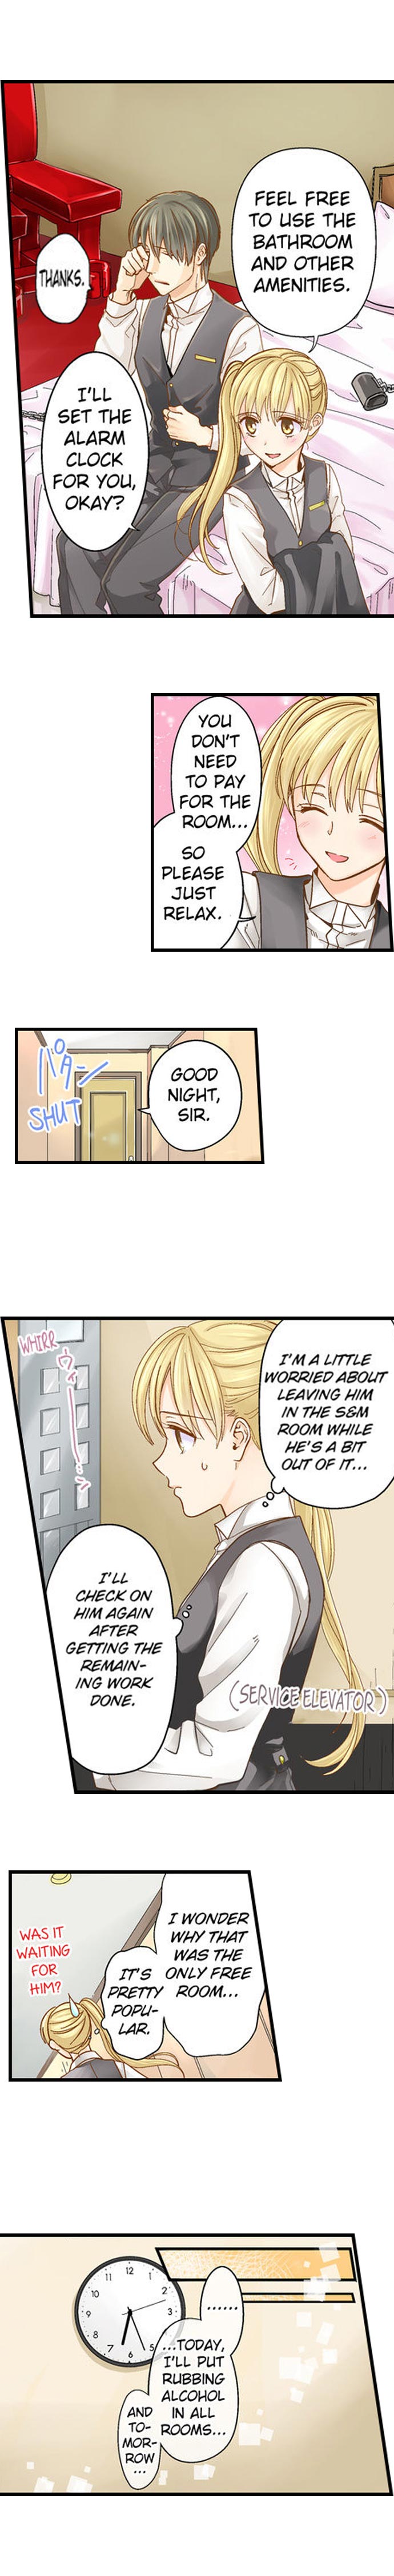 Running a Love Hotel with My Math Teacher - Chapter 37 Page 5